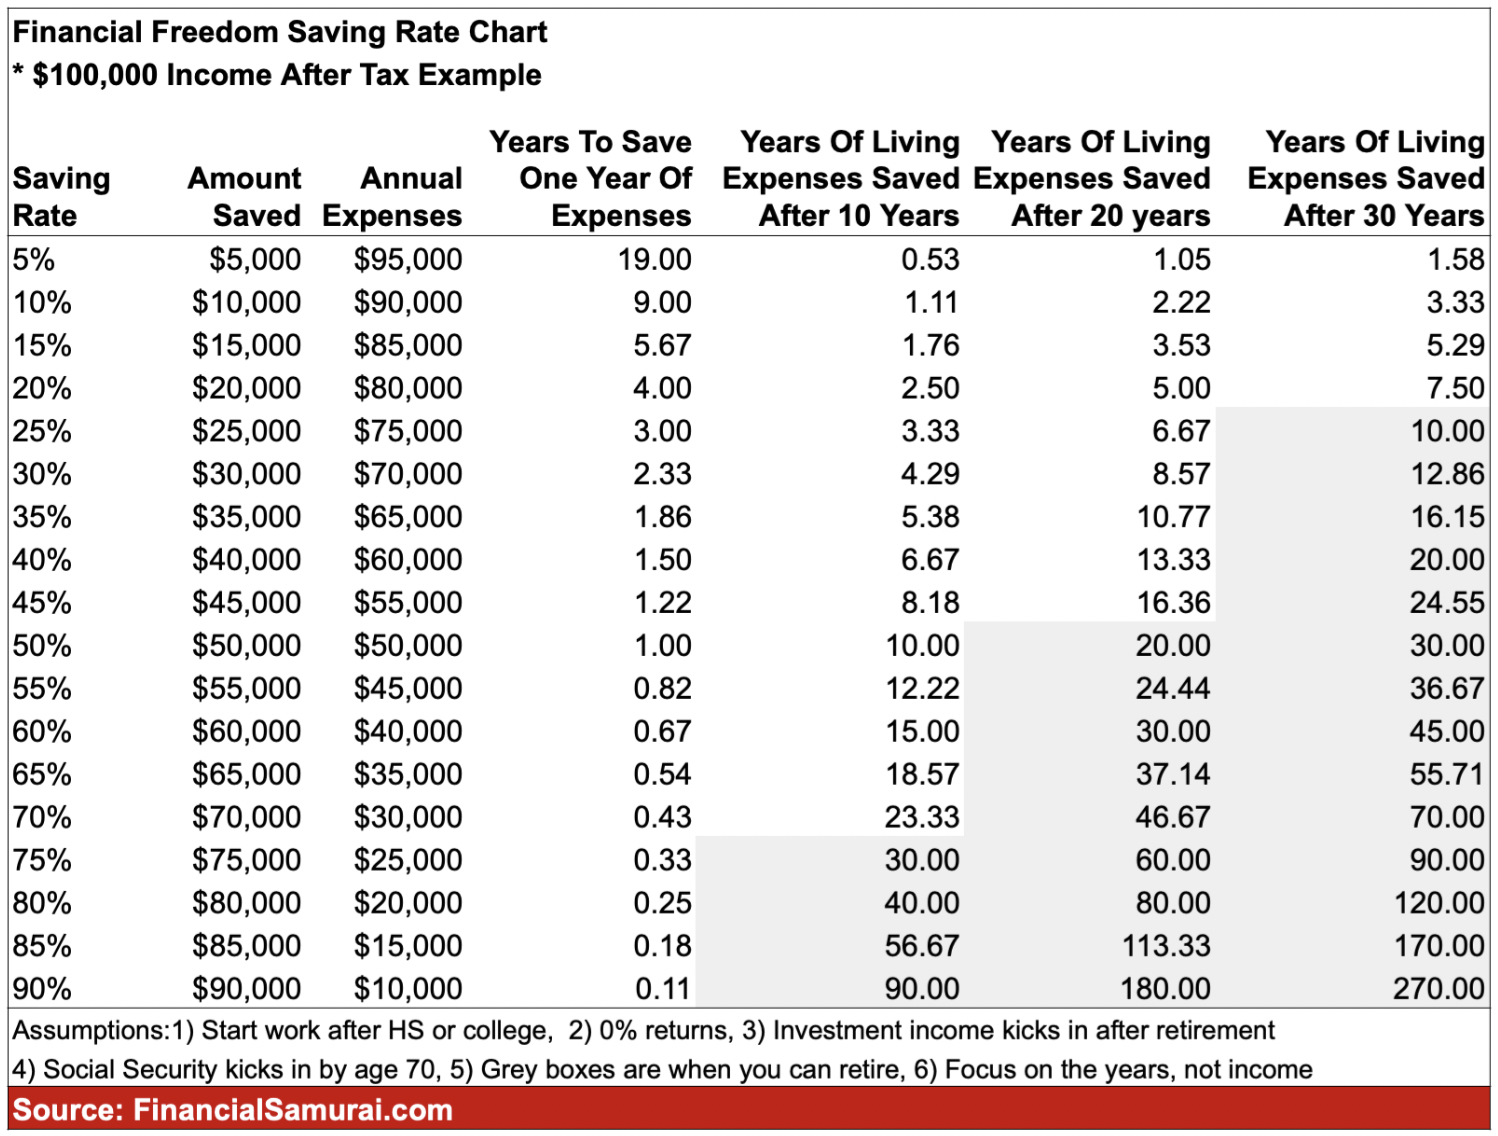 Saving rate chart to help you reach financial freedom and retire early